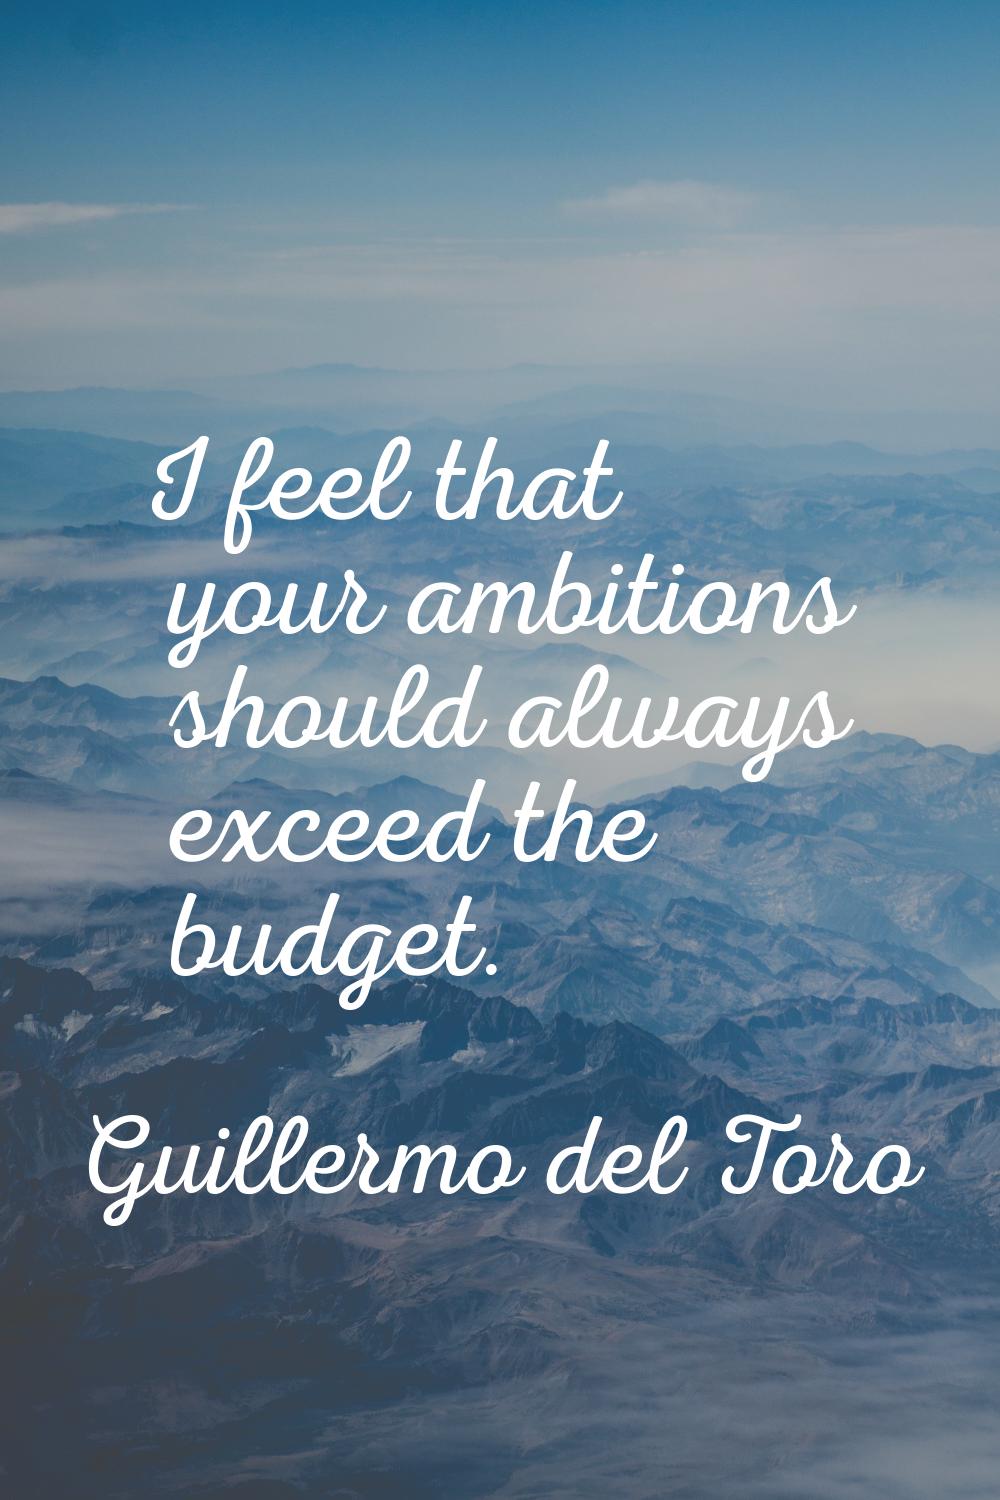 I feel that your ambitions should always exceed the budget.